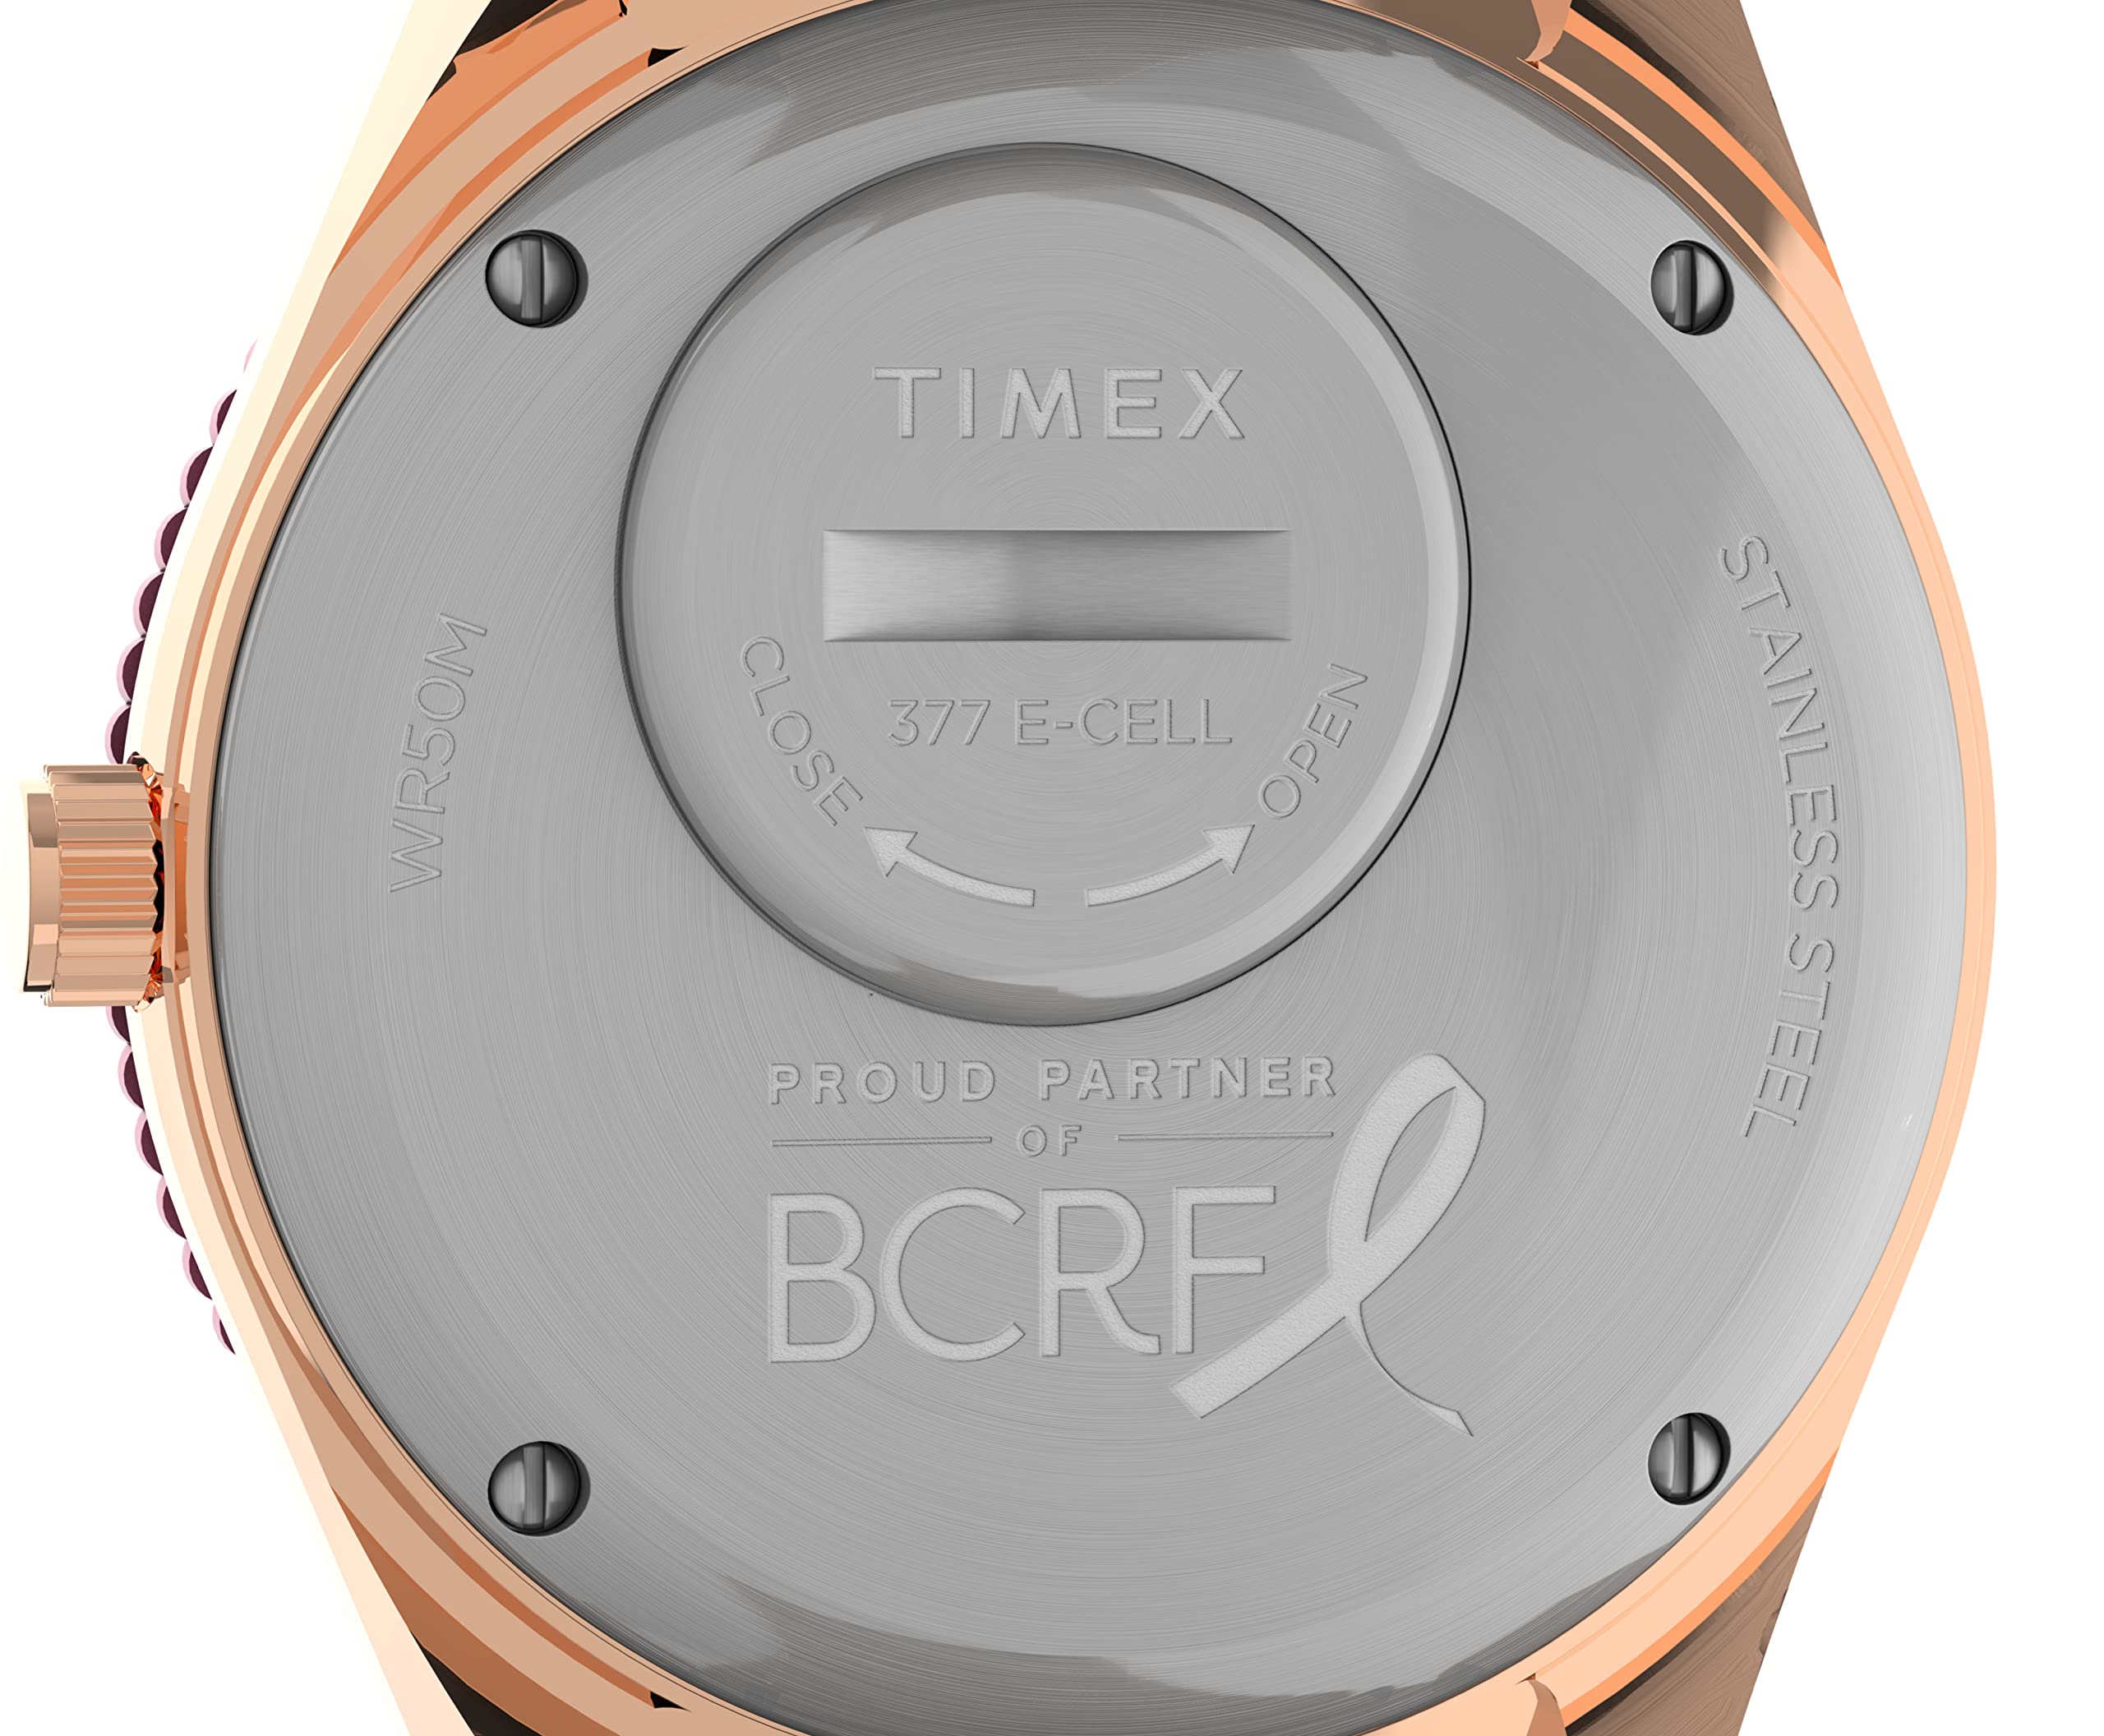 Timex Women's Q X BCRF 36mm Watch - Two-Tone Expansion Band Pink Dial Rose Gold-Tone Case